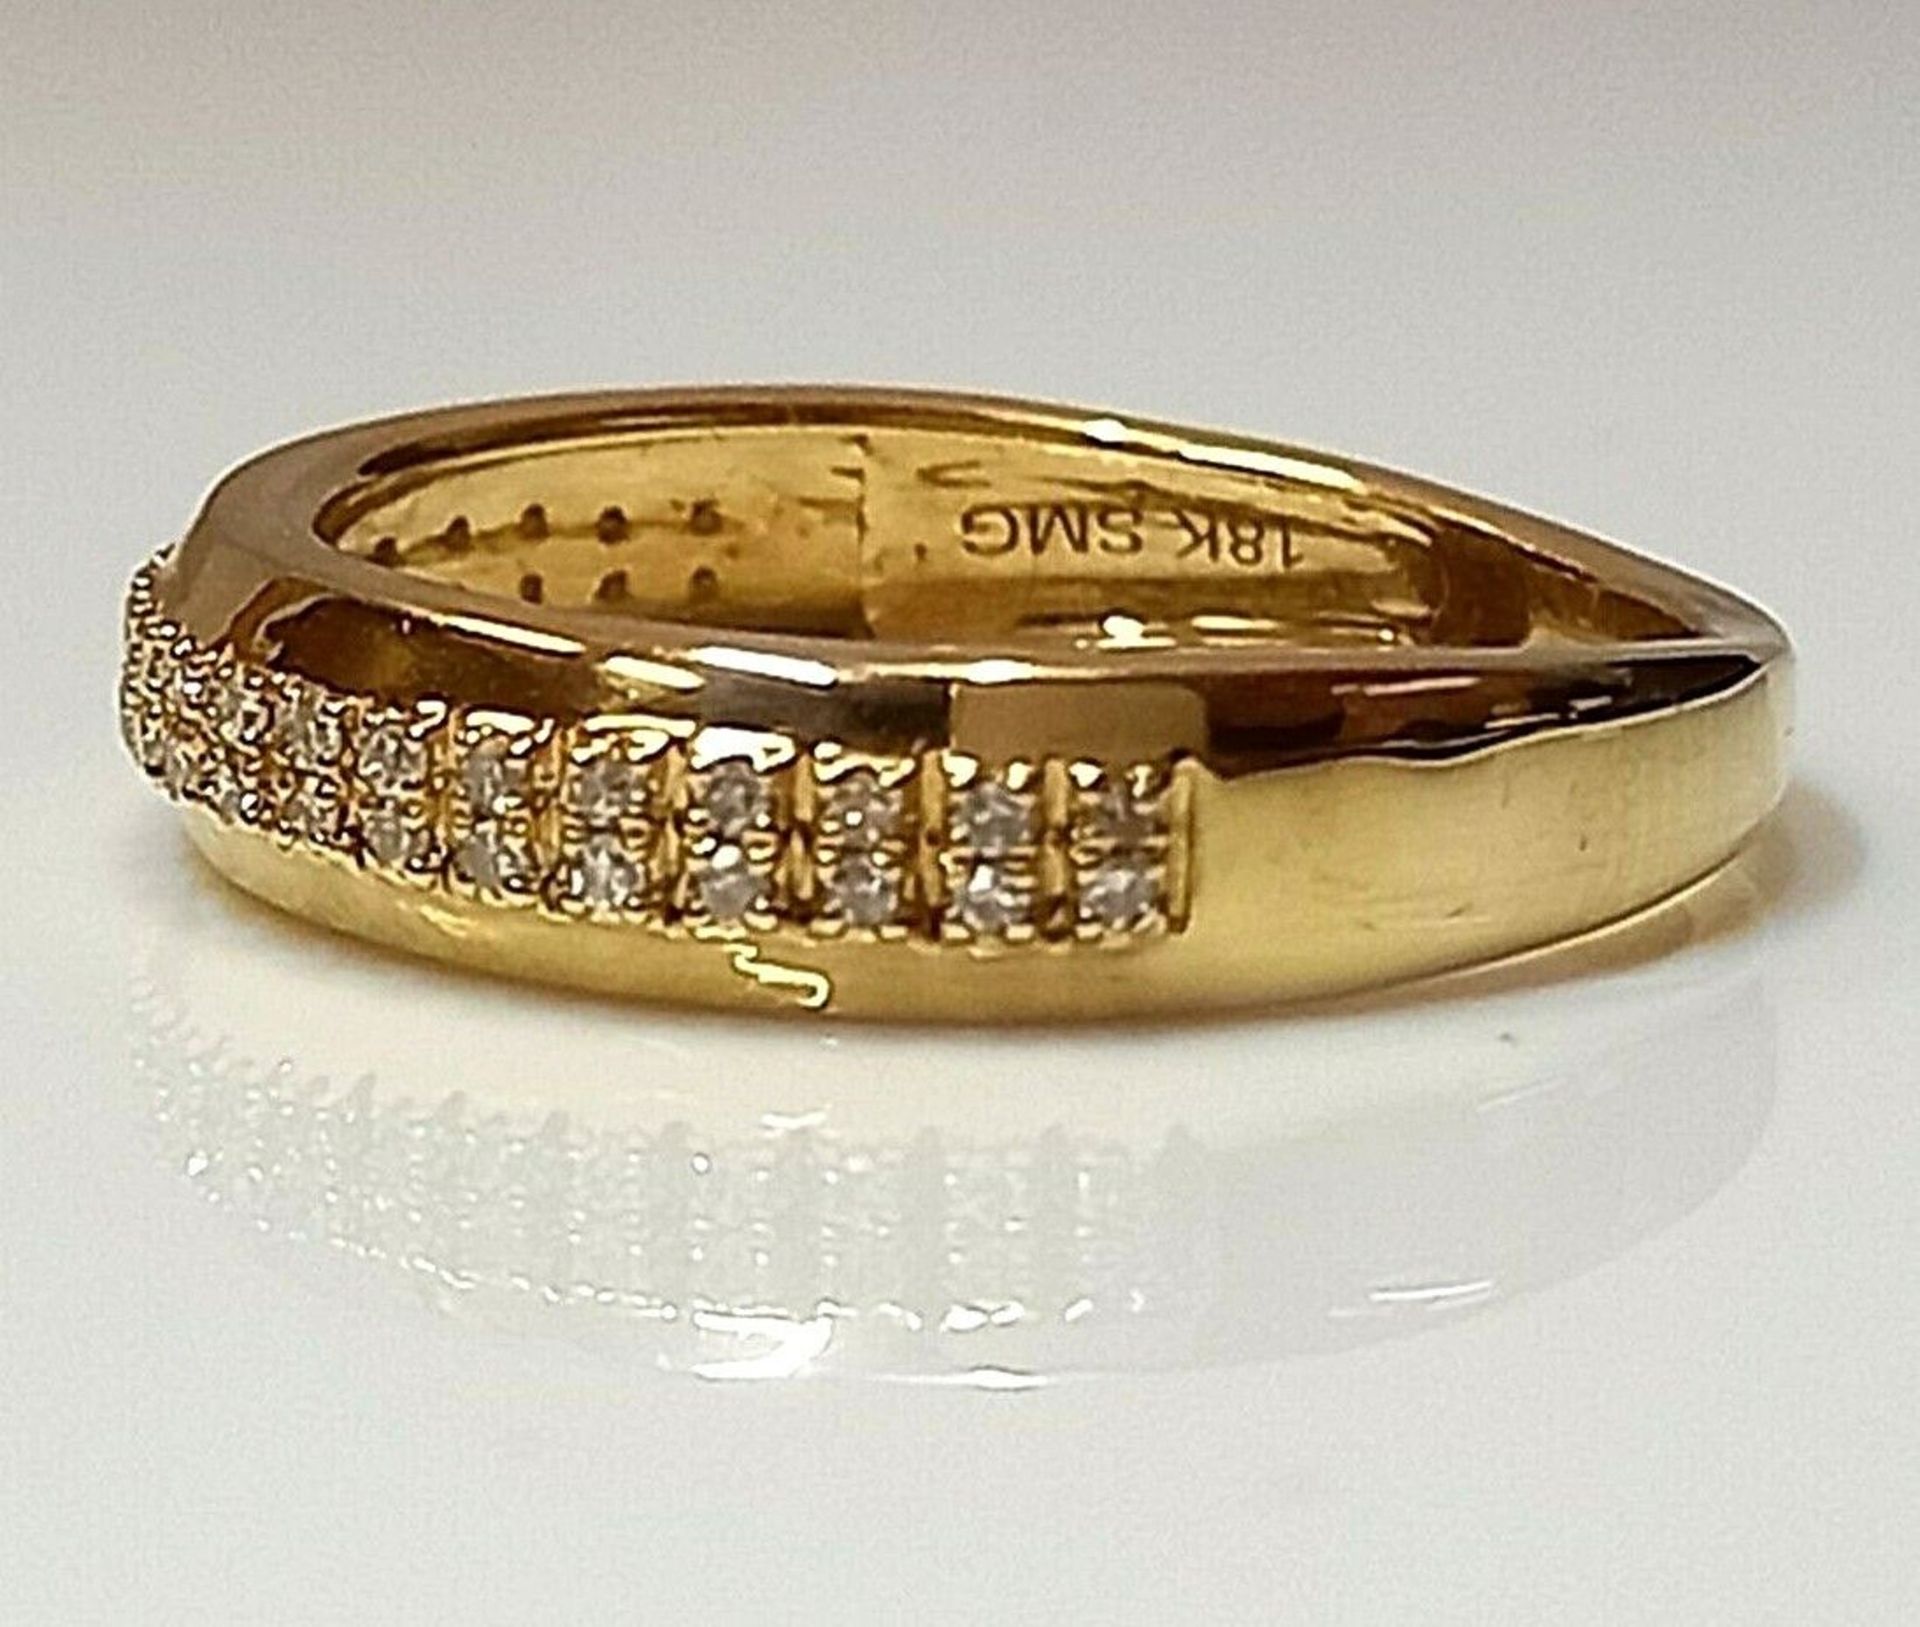 DIAMOND WEDDING BAND/YELLOW GOLD/0.25CT IN GIFT BOX WITH VALUATION CERTIFICATE OF £1995 - Image 2 of 3